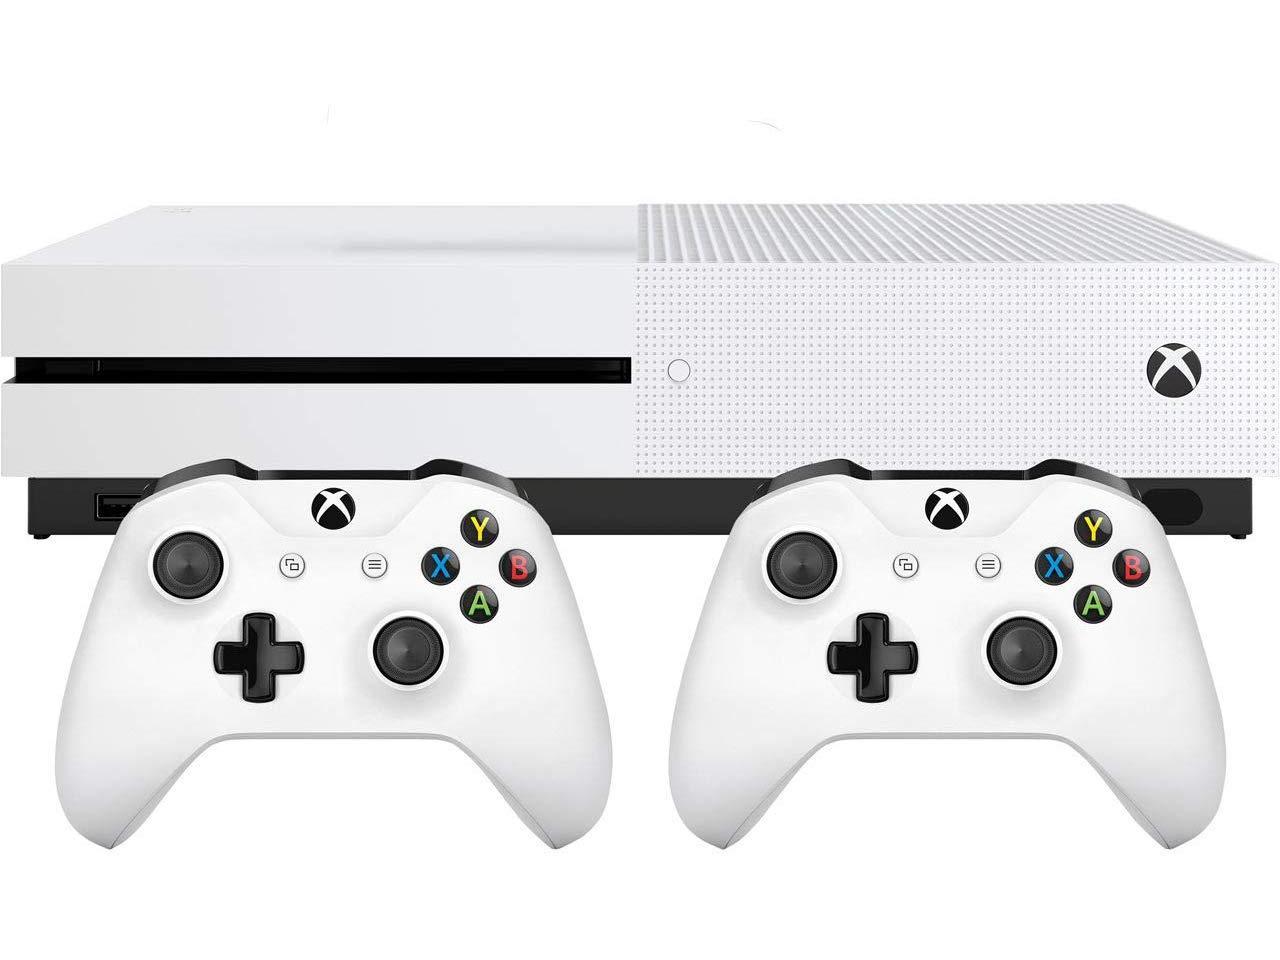 xbox one s 1tb console with 2 controllers